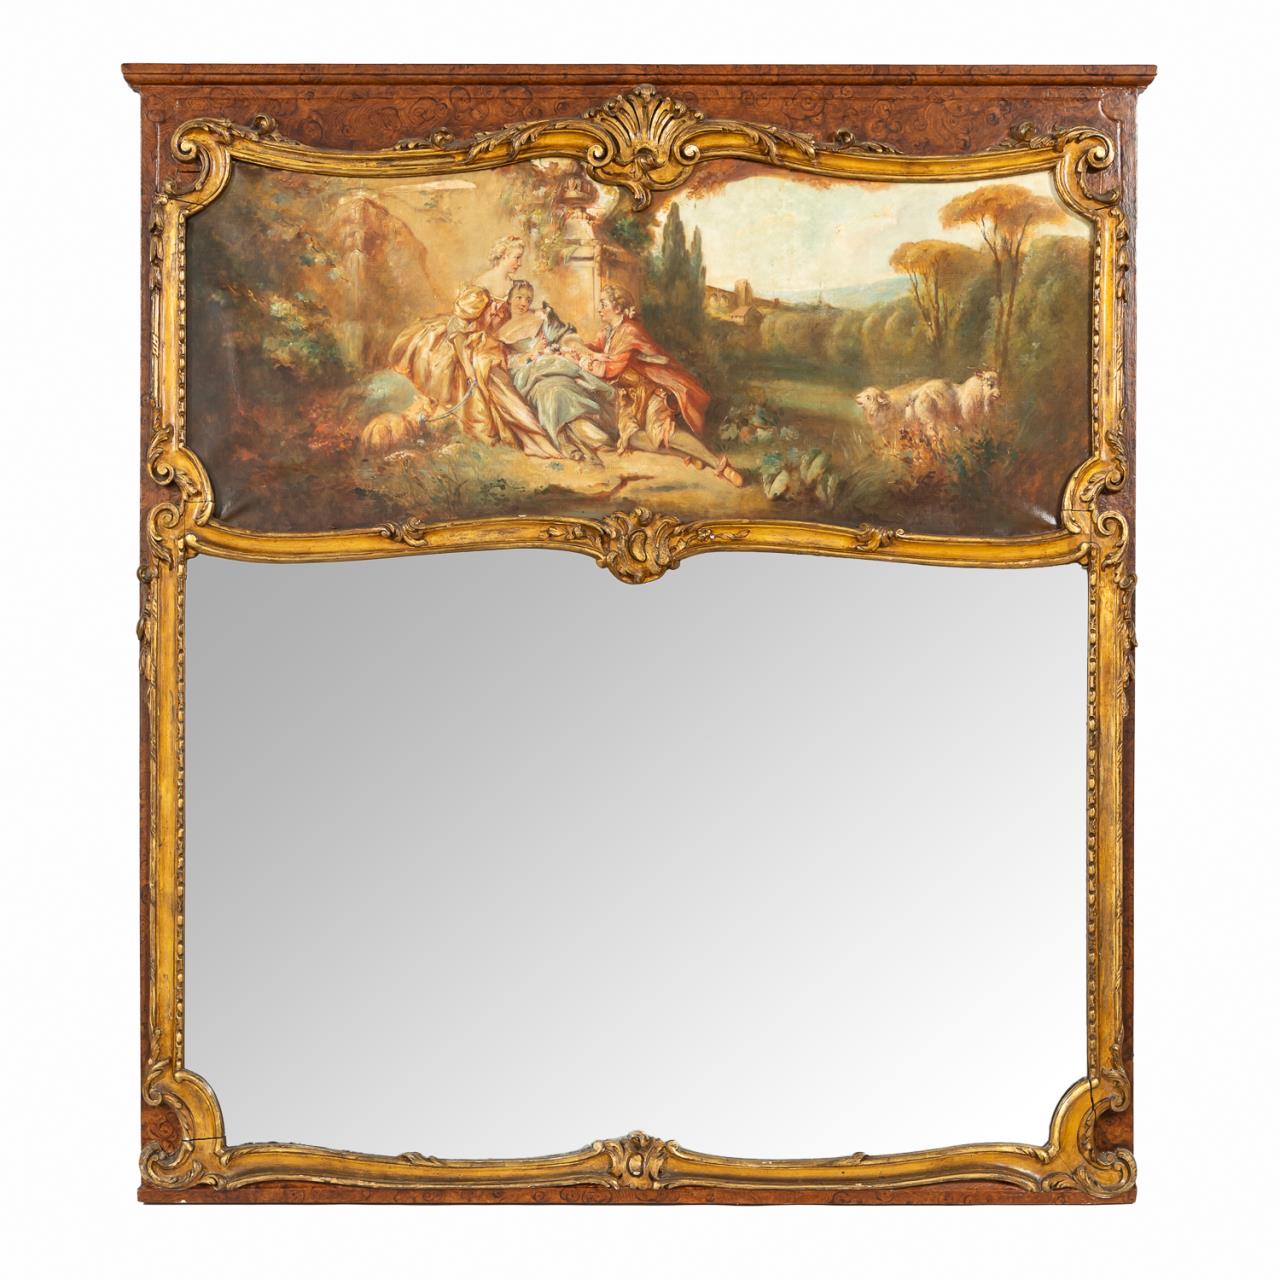 LOUIS XV STYLE TRUMEAU MIRROR WITH 35d360